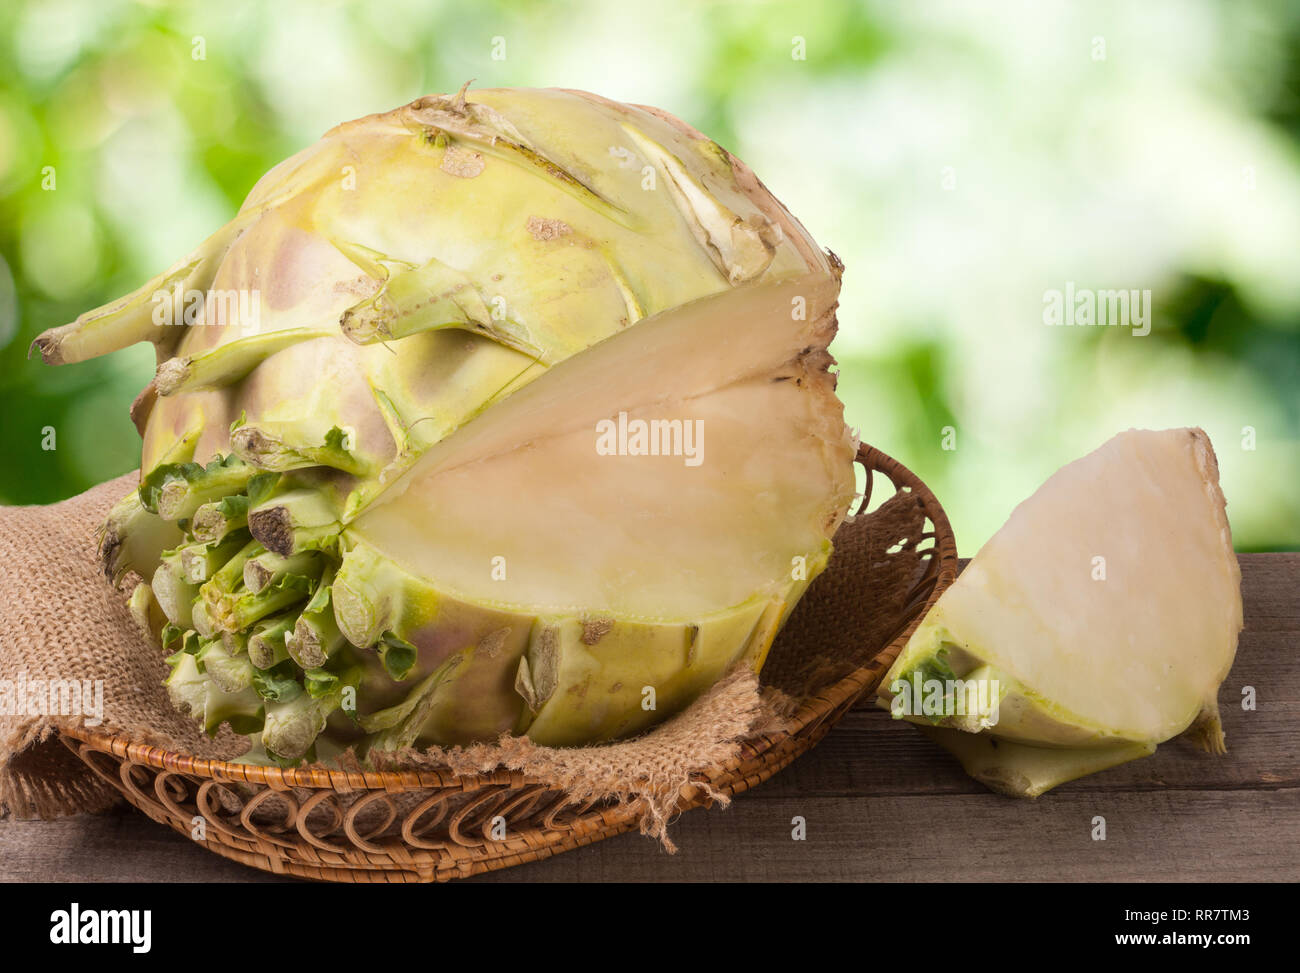 Raw Cabbage On A Plane On A Wooden Vintage Background Stock Photo, Picture  and Royalty Free Image. Image 57581571.